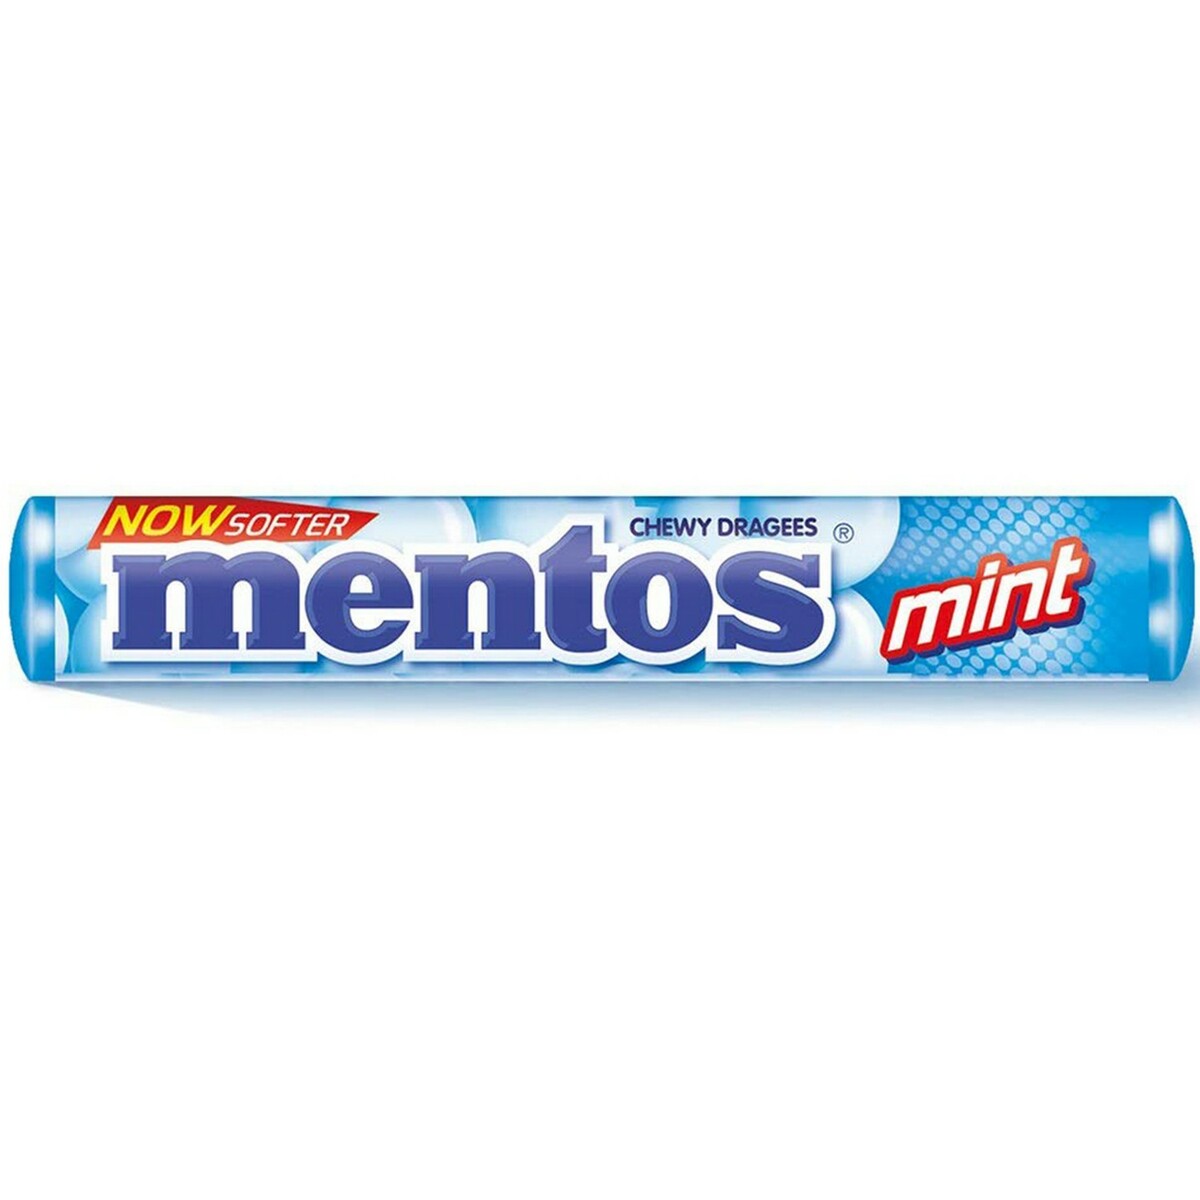 Mentos Mint Chewy Dragees 31.2g